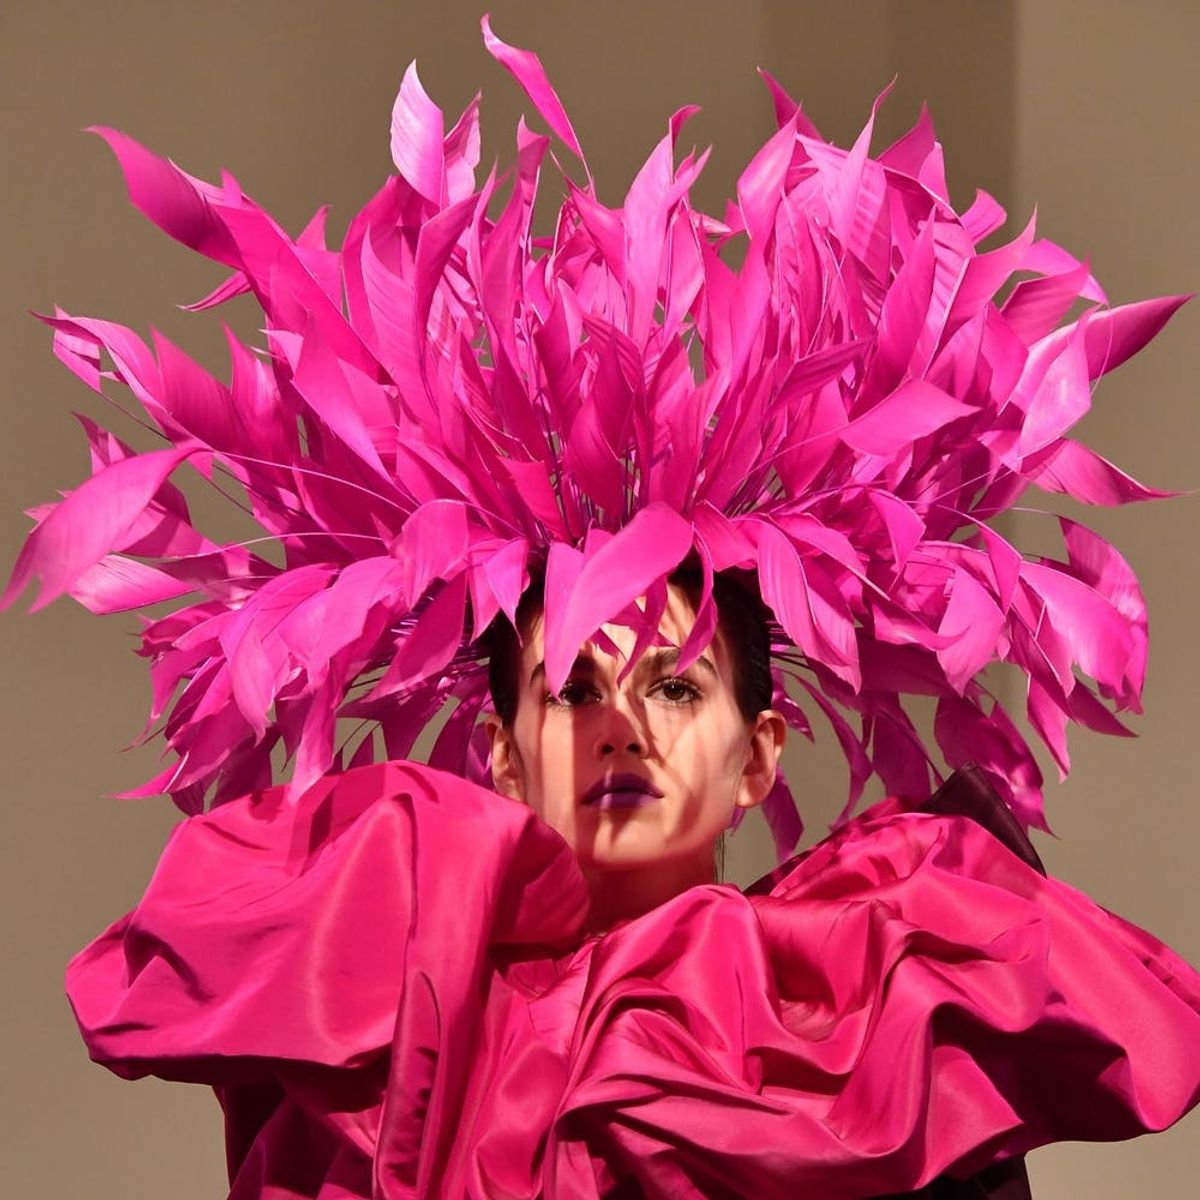 Valentino Just Debuted *the* Most Insane Dr. Seuss-Inspired Hats on the Runway